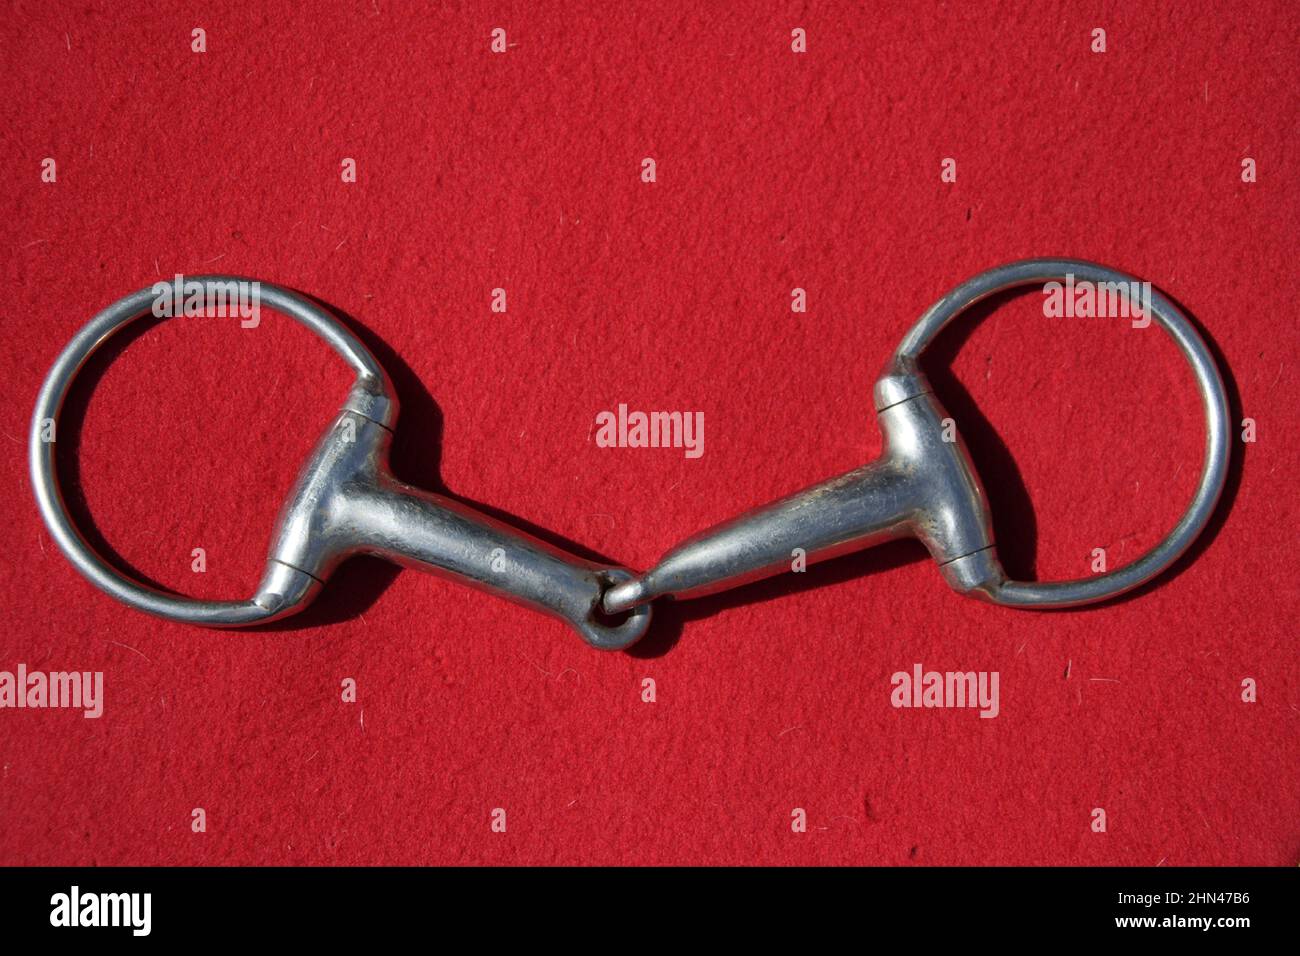 Domestic horse. Eggbutt snaffle bit. Studio picture on red background Stock Photo